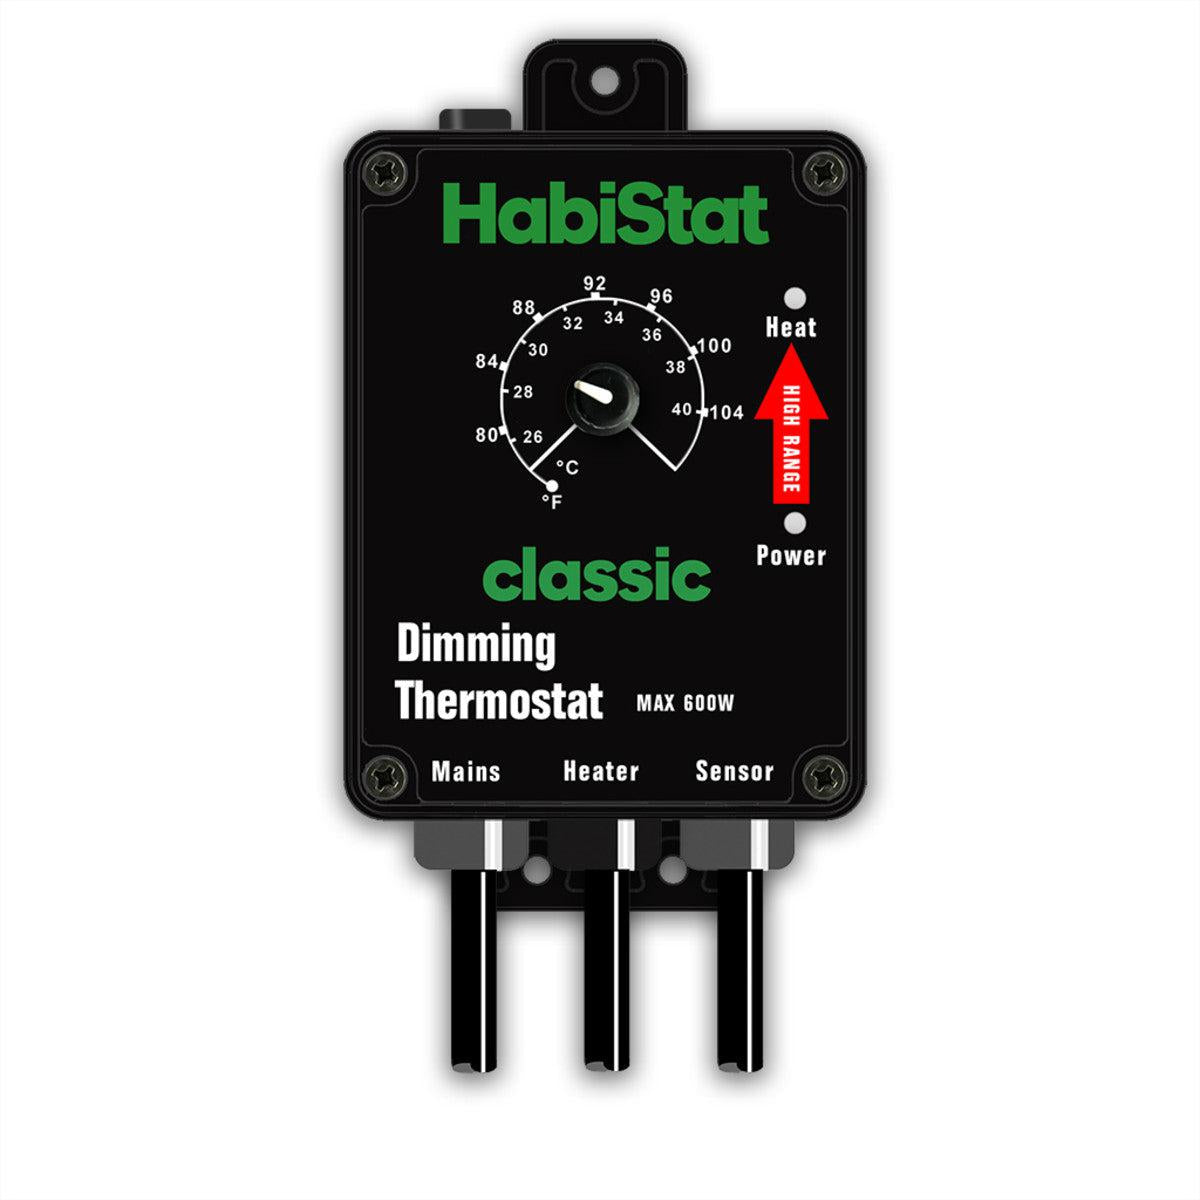 HabiStat Dimming Thermostat